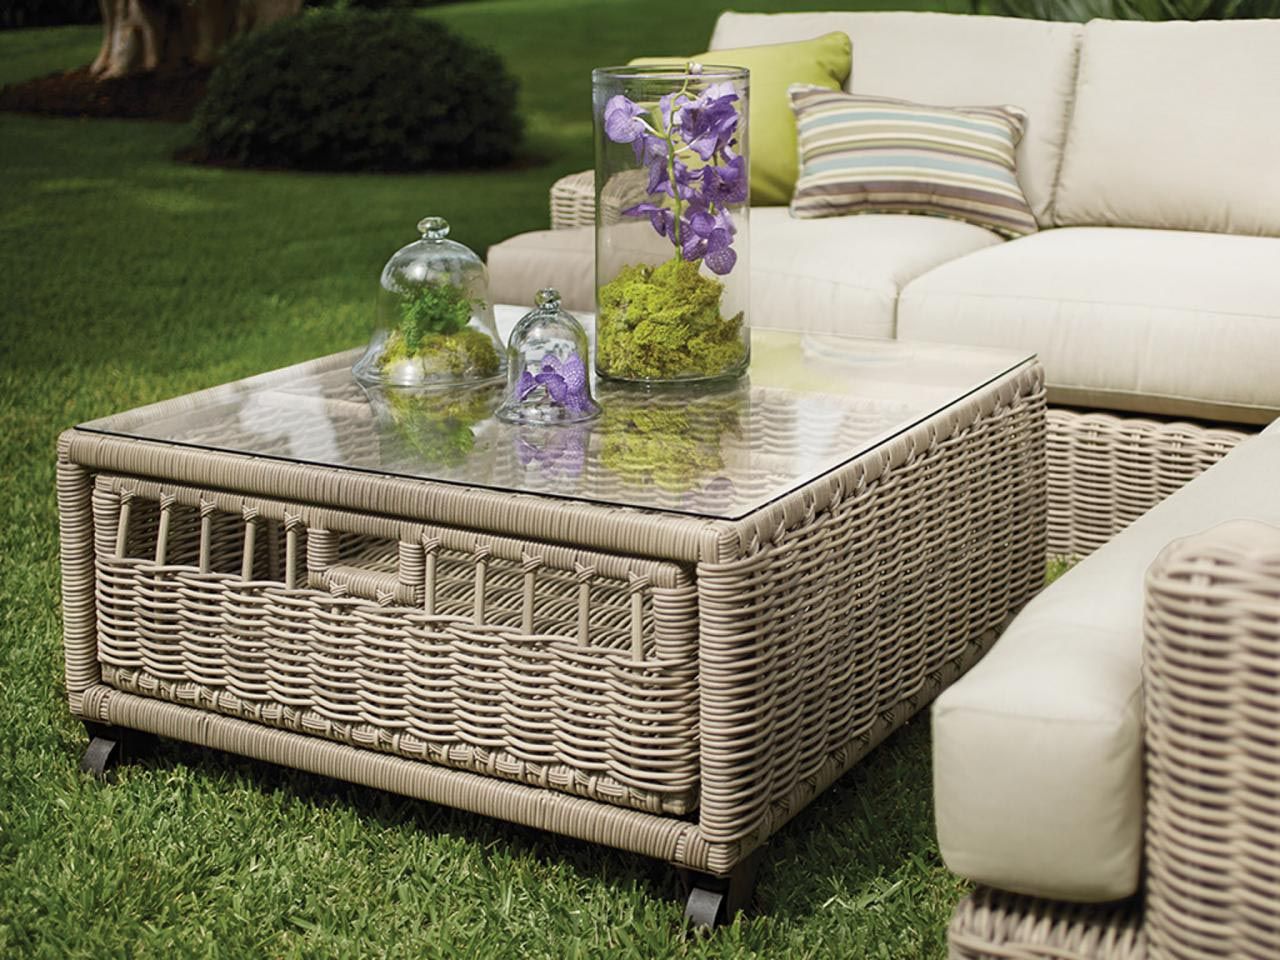 Patio Coffee Table With Storage | Coffee Table Design Ideas With Regard To Outdoor Coffee Tables With Storage (View 12 of 15)